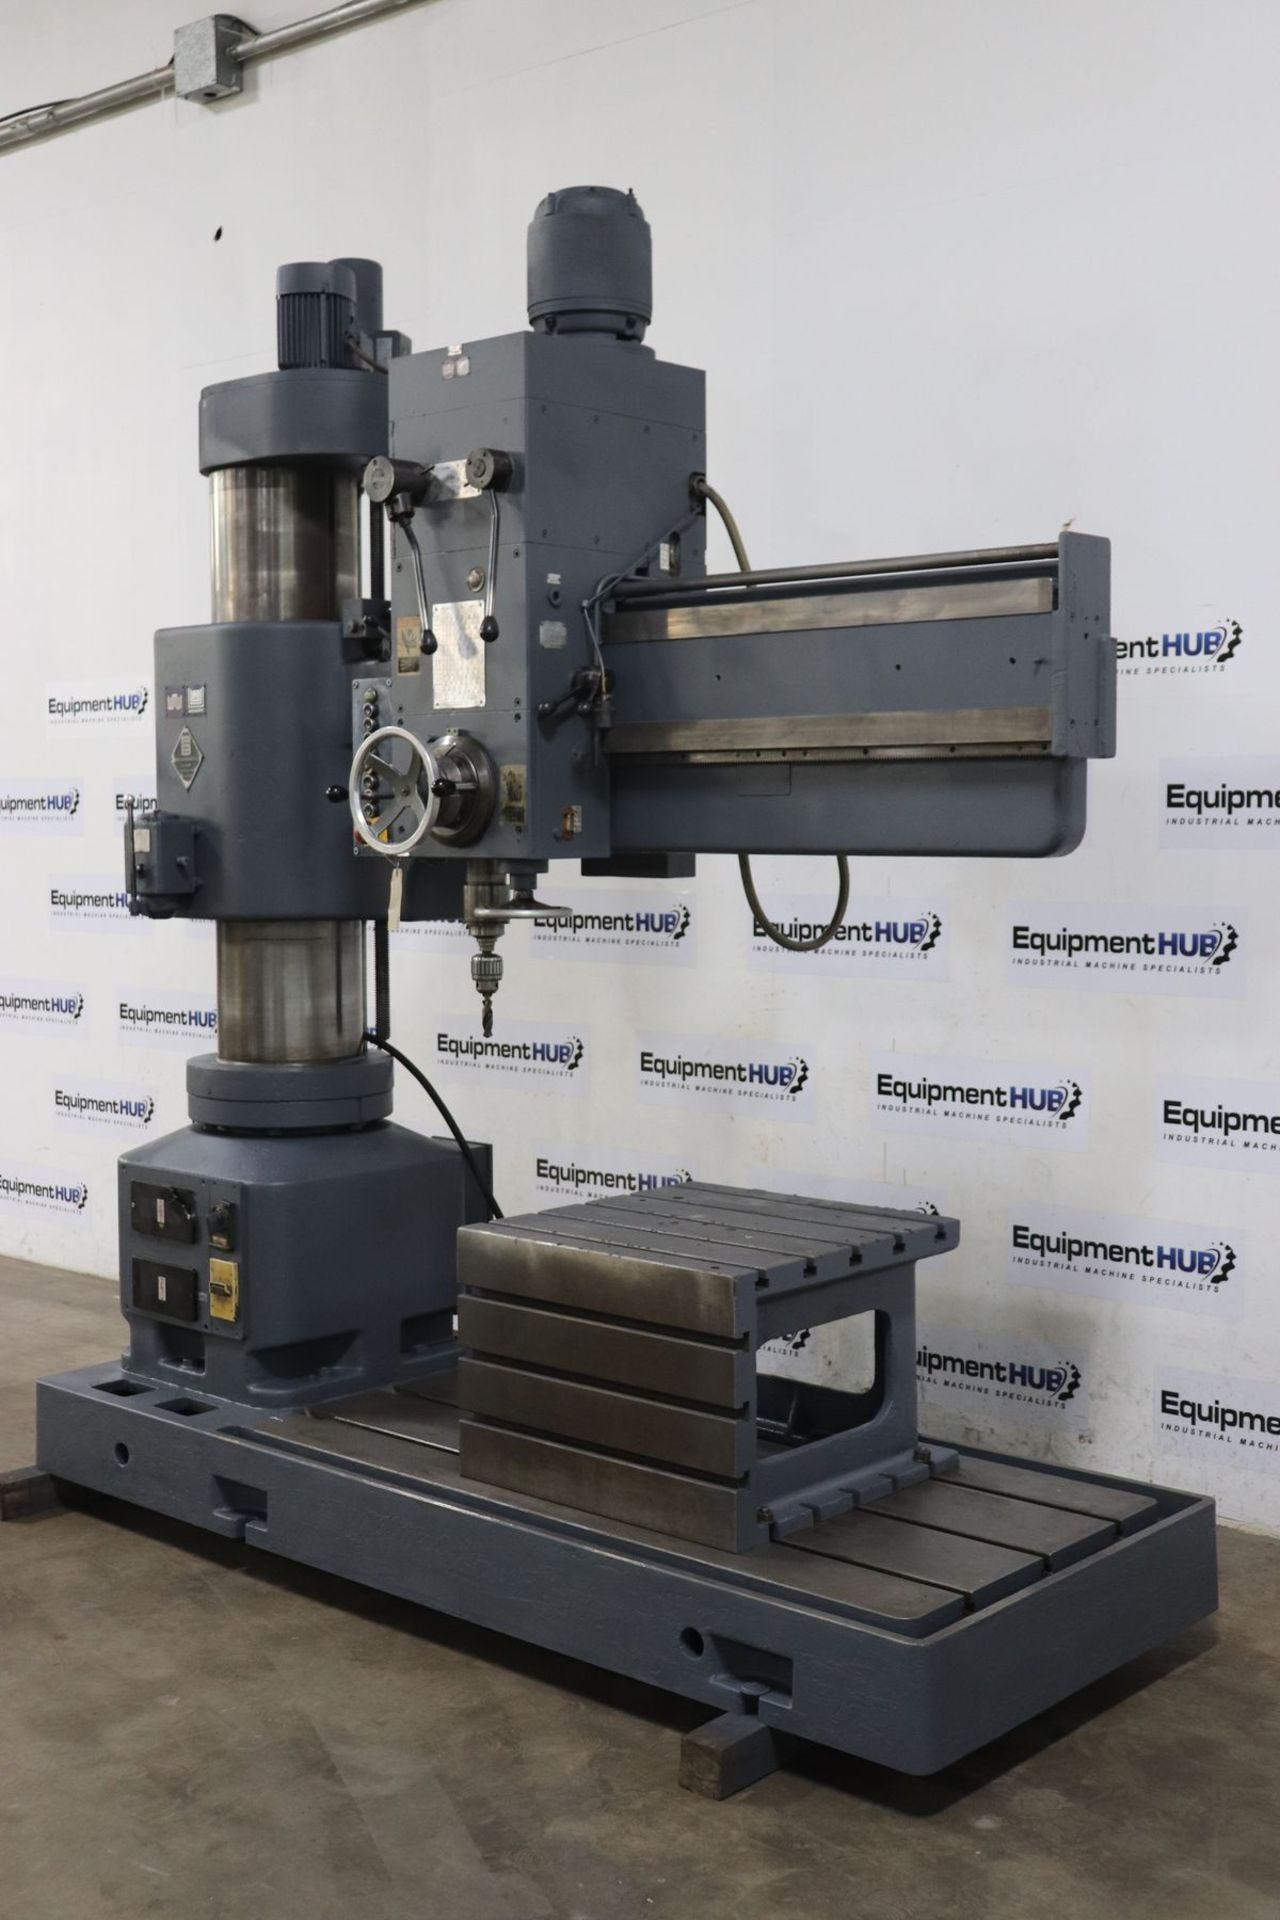 Heckert WMW BR 50 x 1600 5? x 13? Radial Arm Drilling & Tapping Machine - Image 3 of 13